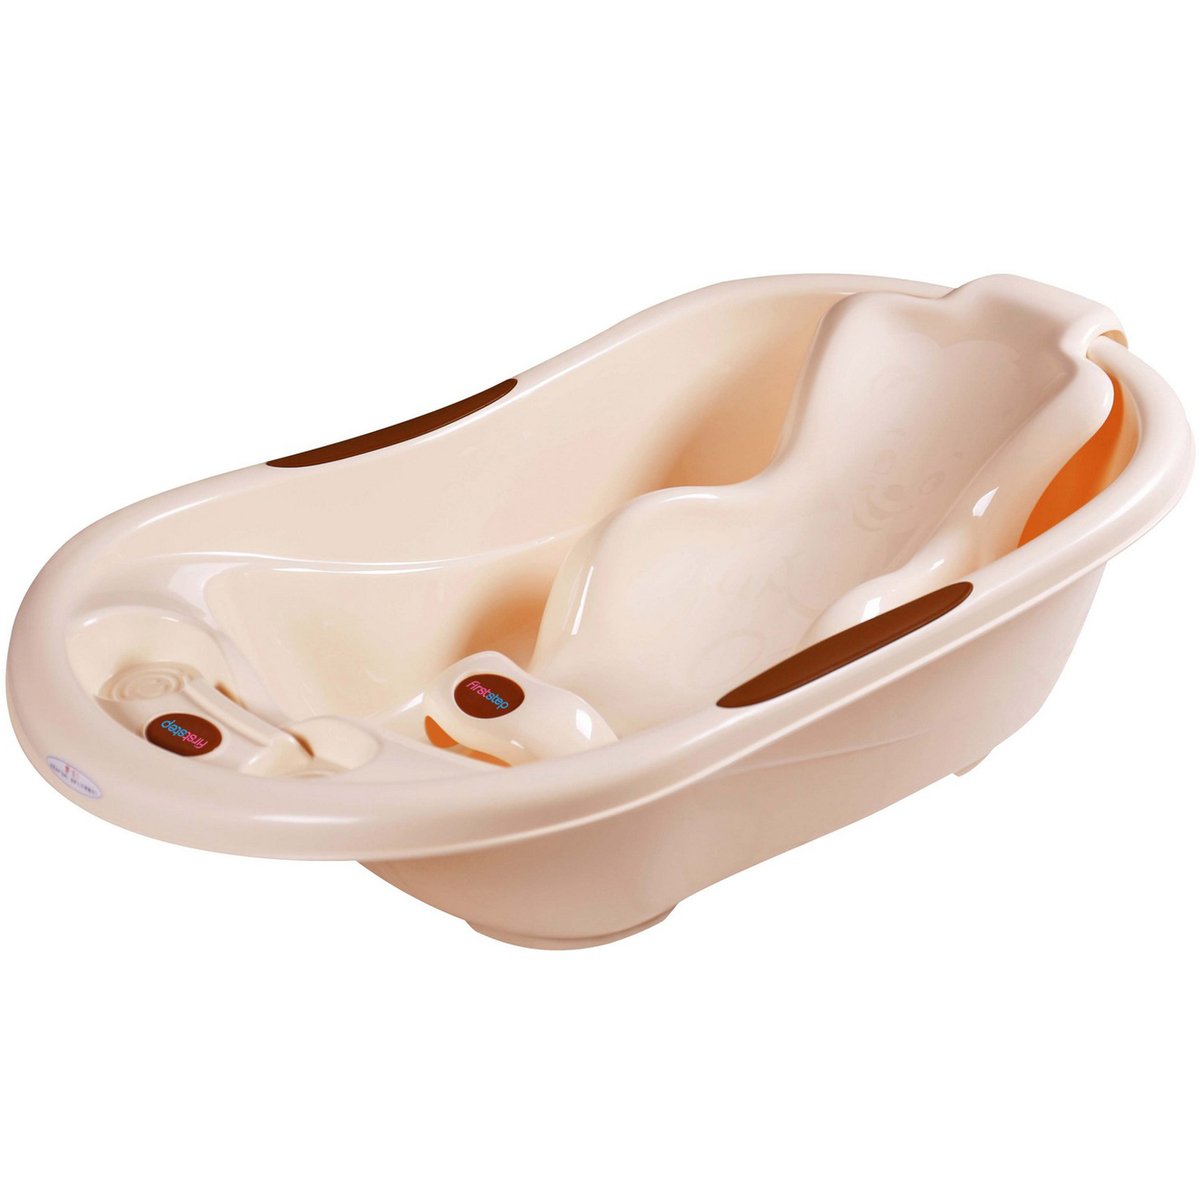 First Step Baby Bath Tub QC-8801 Assorted color